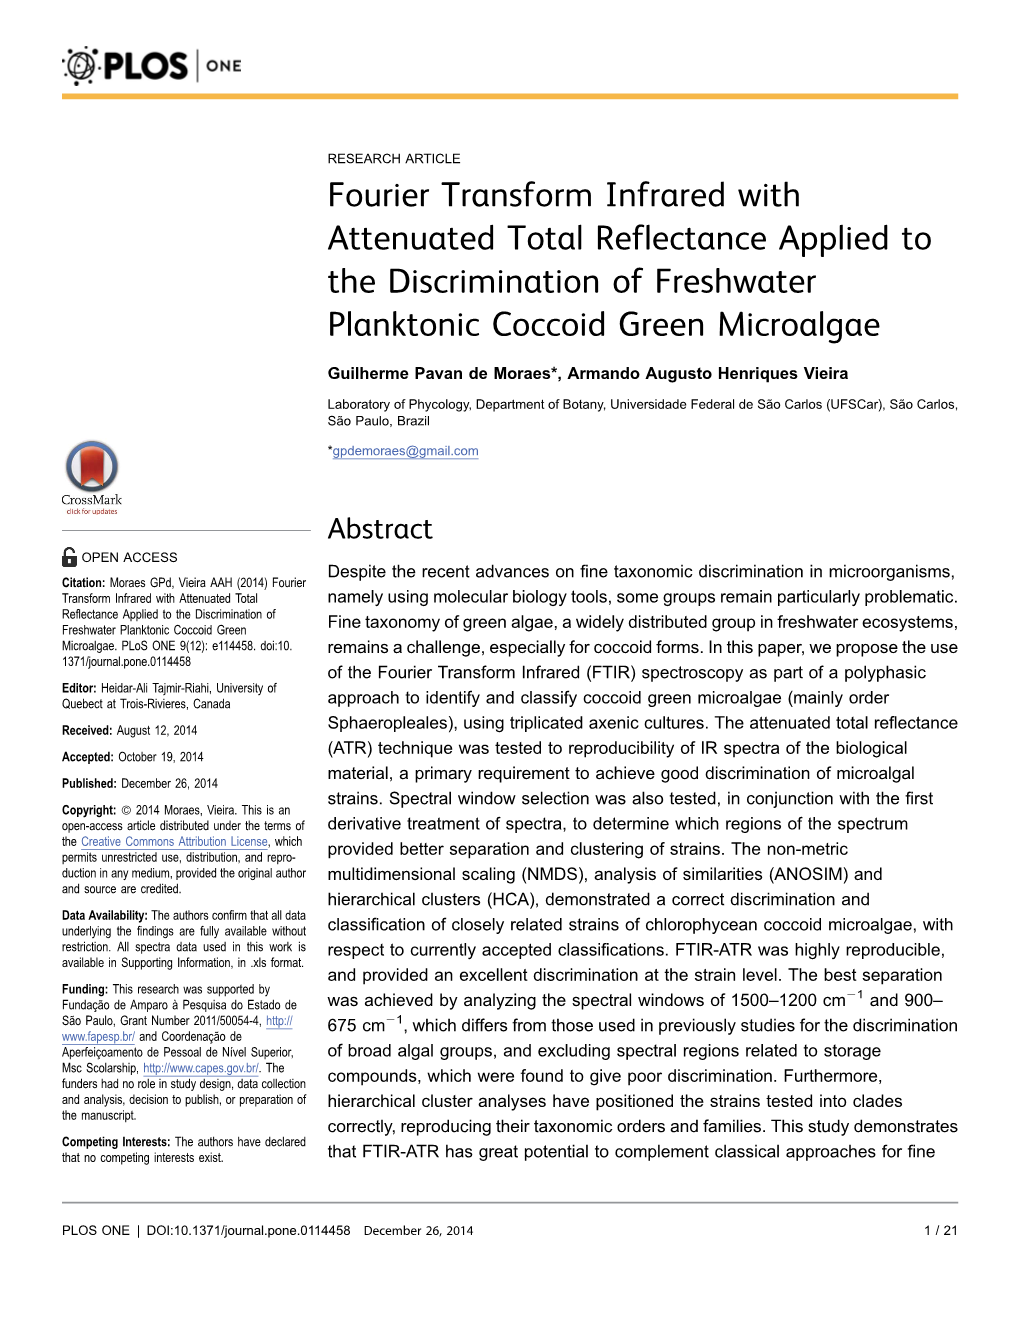 Fourier Transform Infrared with Attenuated Total Reflectance Applied to the Discrimination of Freshwater Planktonic Coccoid Green Microalgae